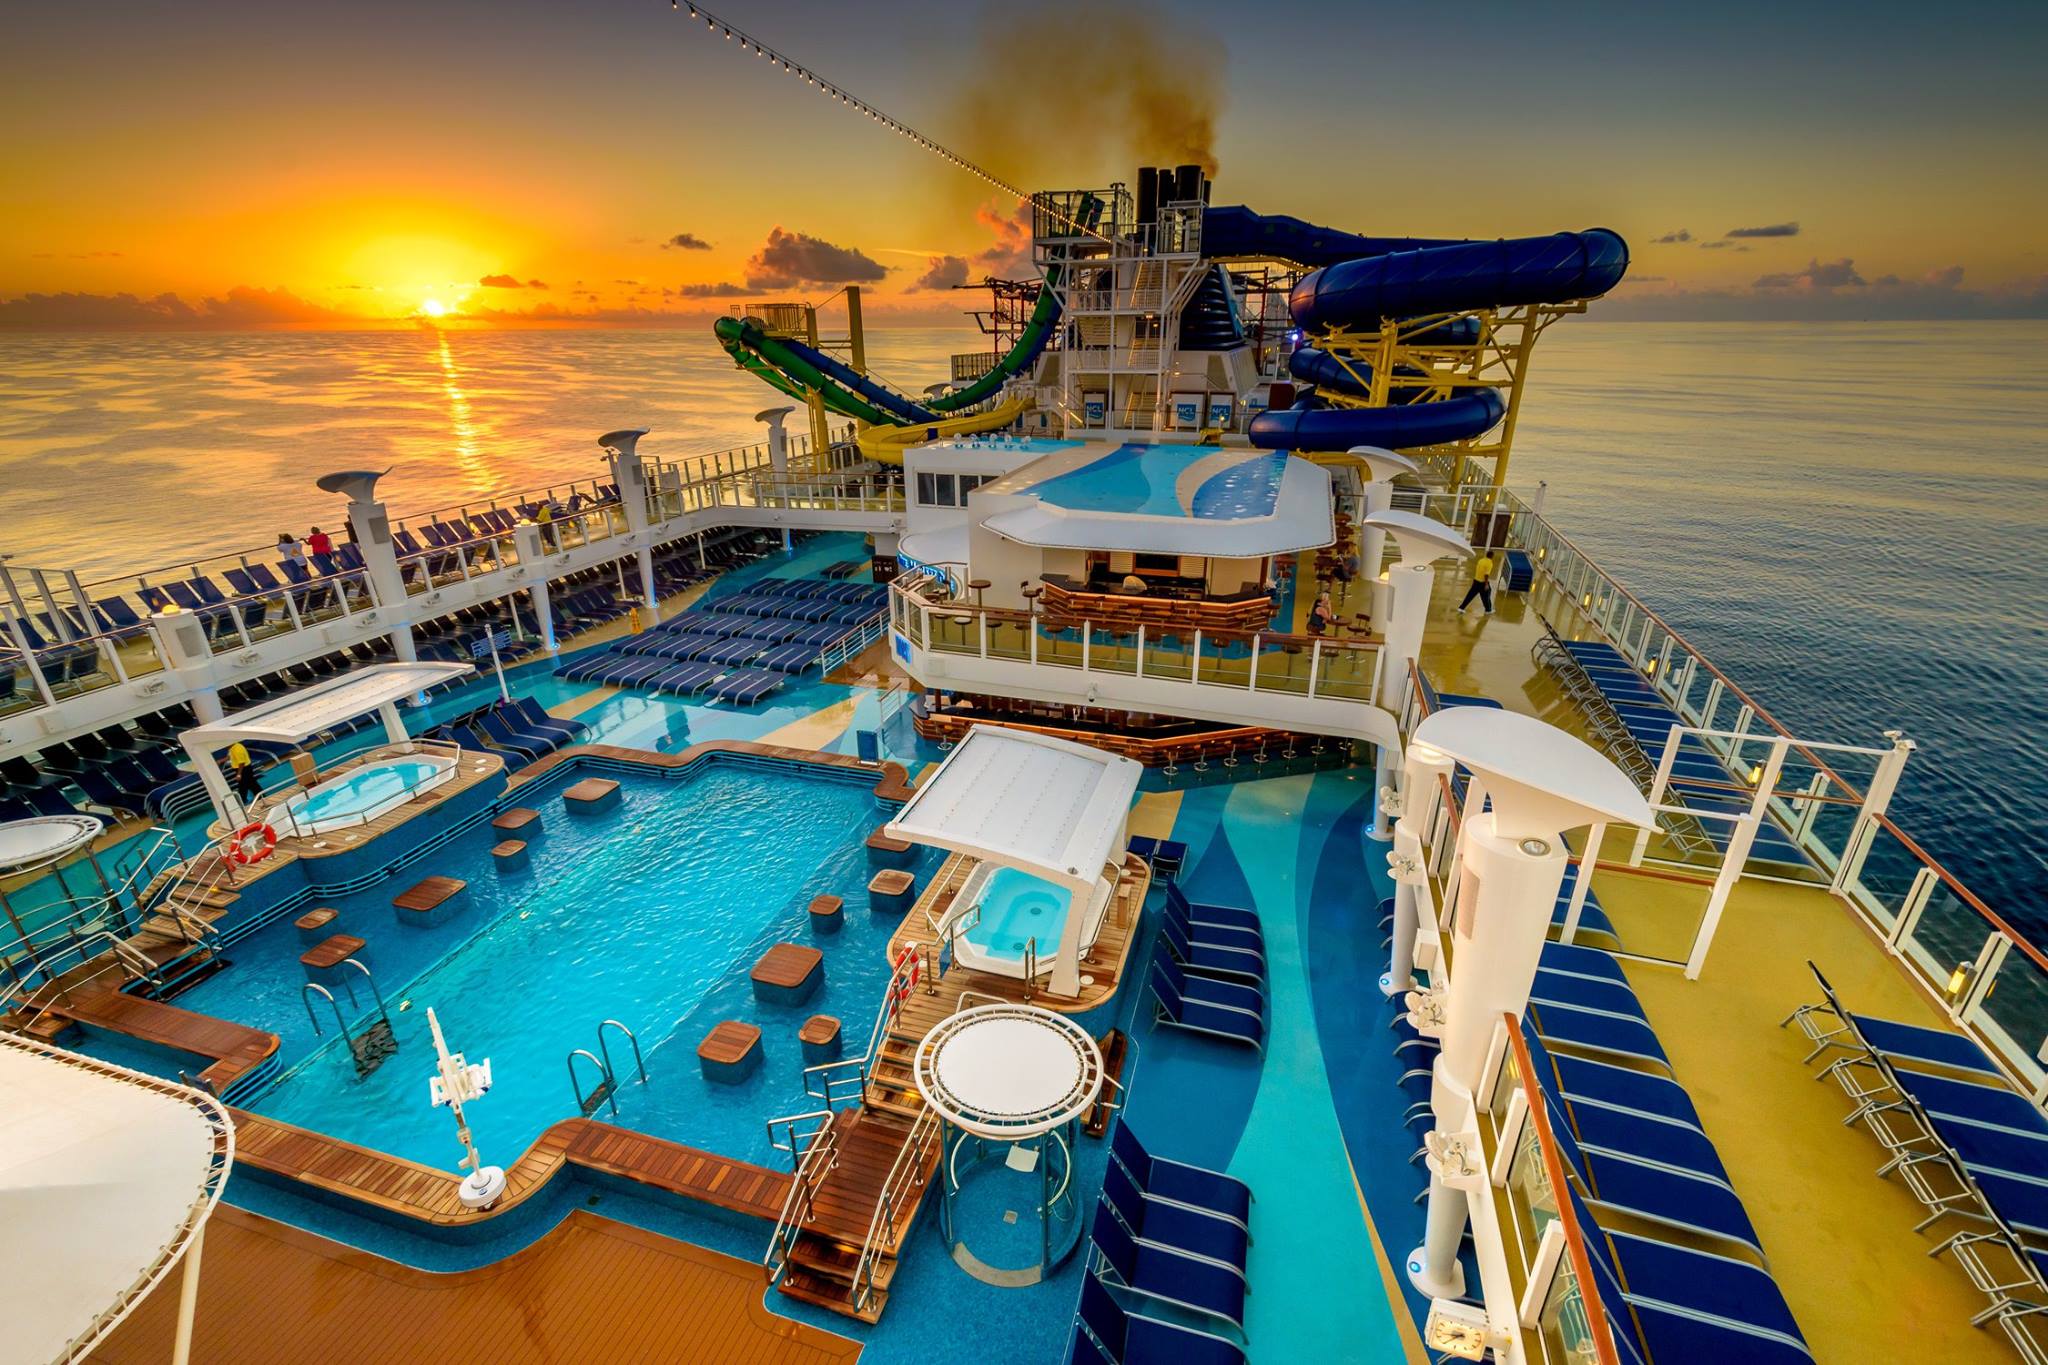 25 Tips to Save BIG on Your Next Cruise - sunset on a cruise ship